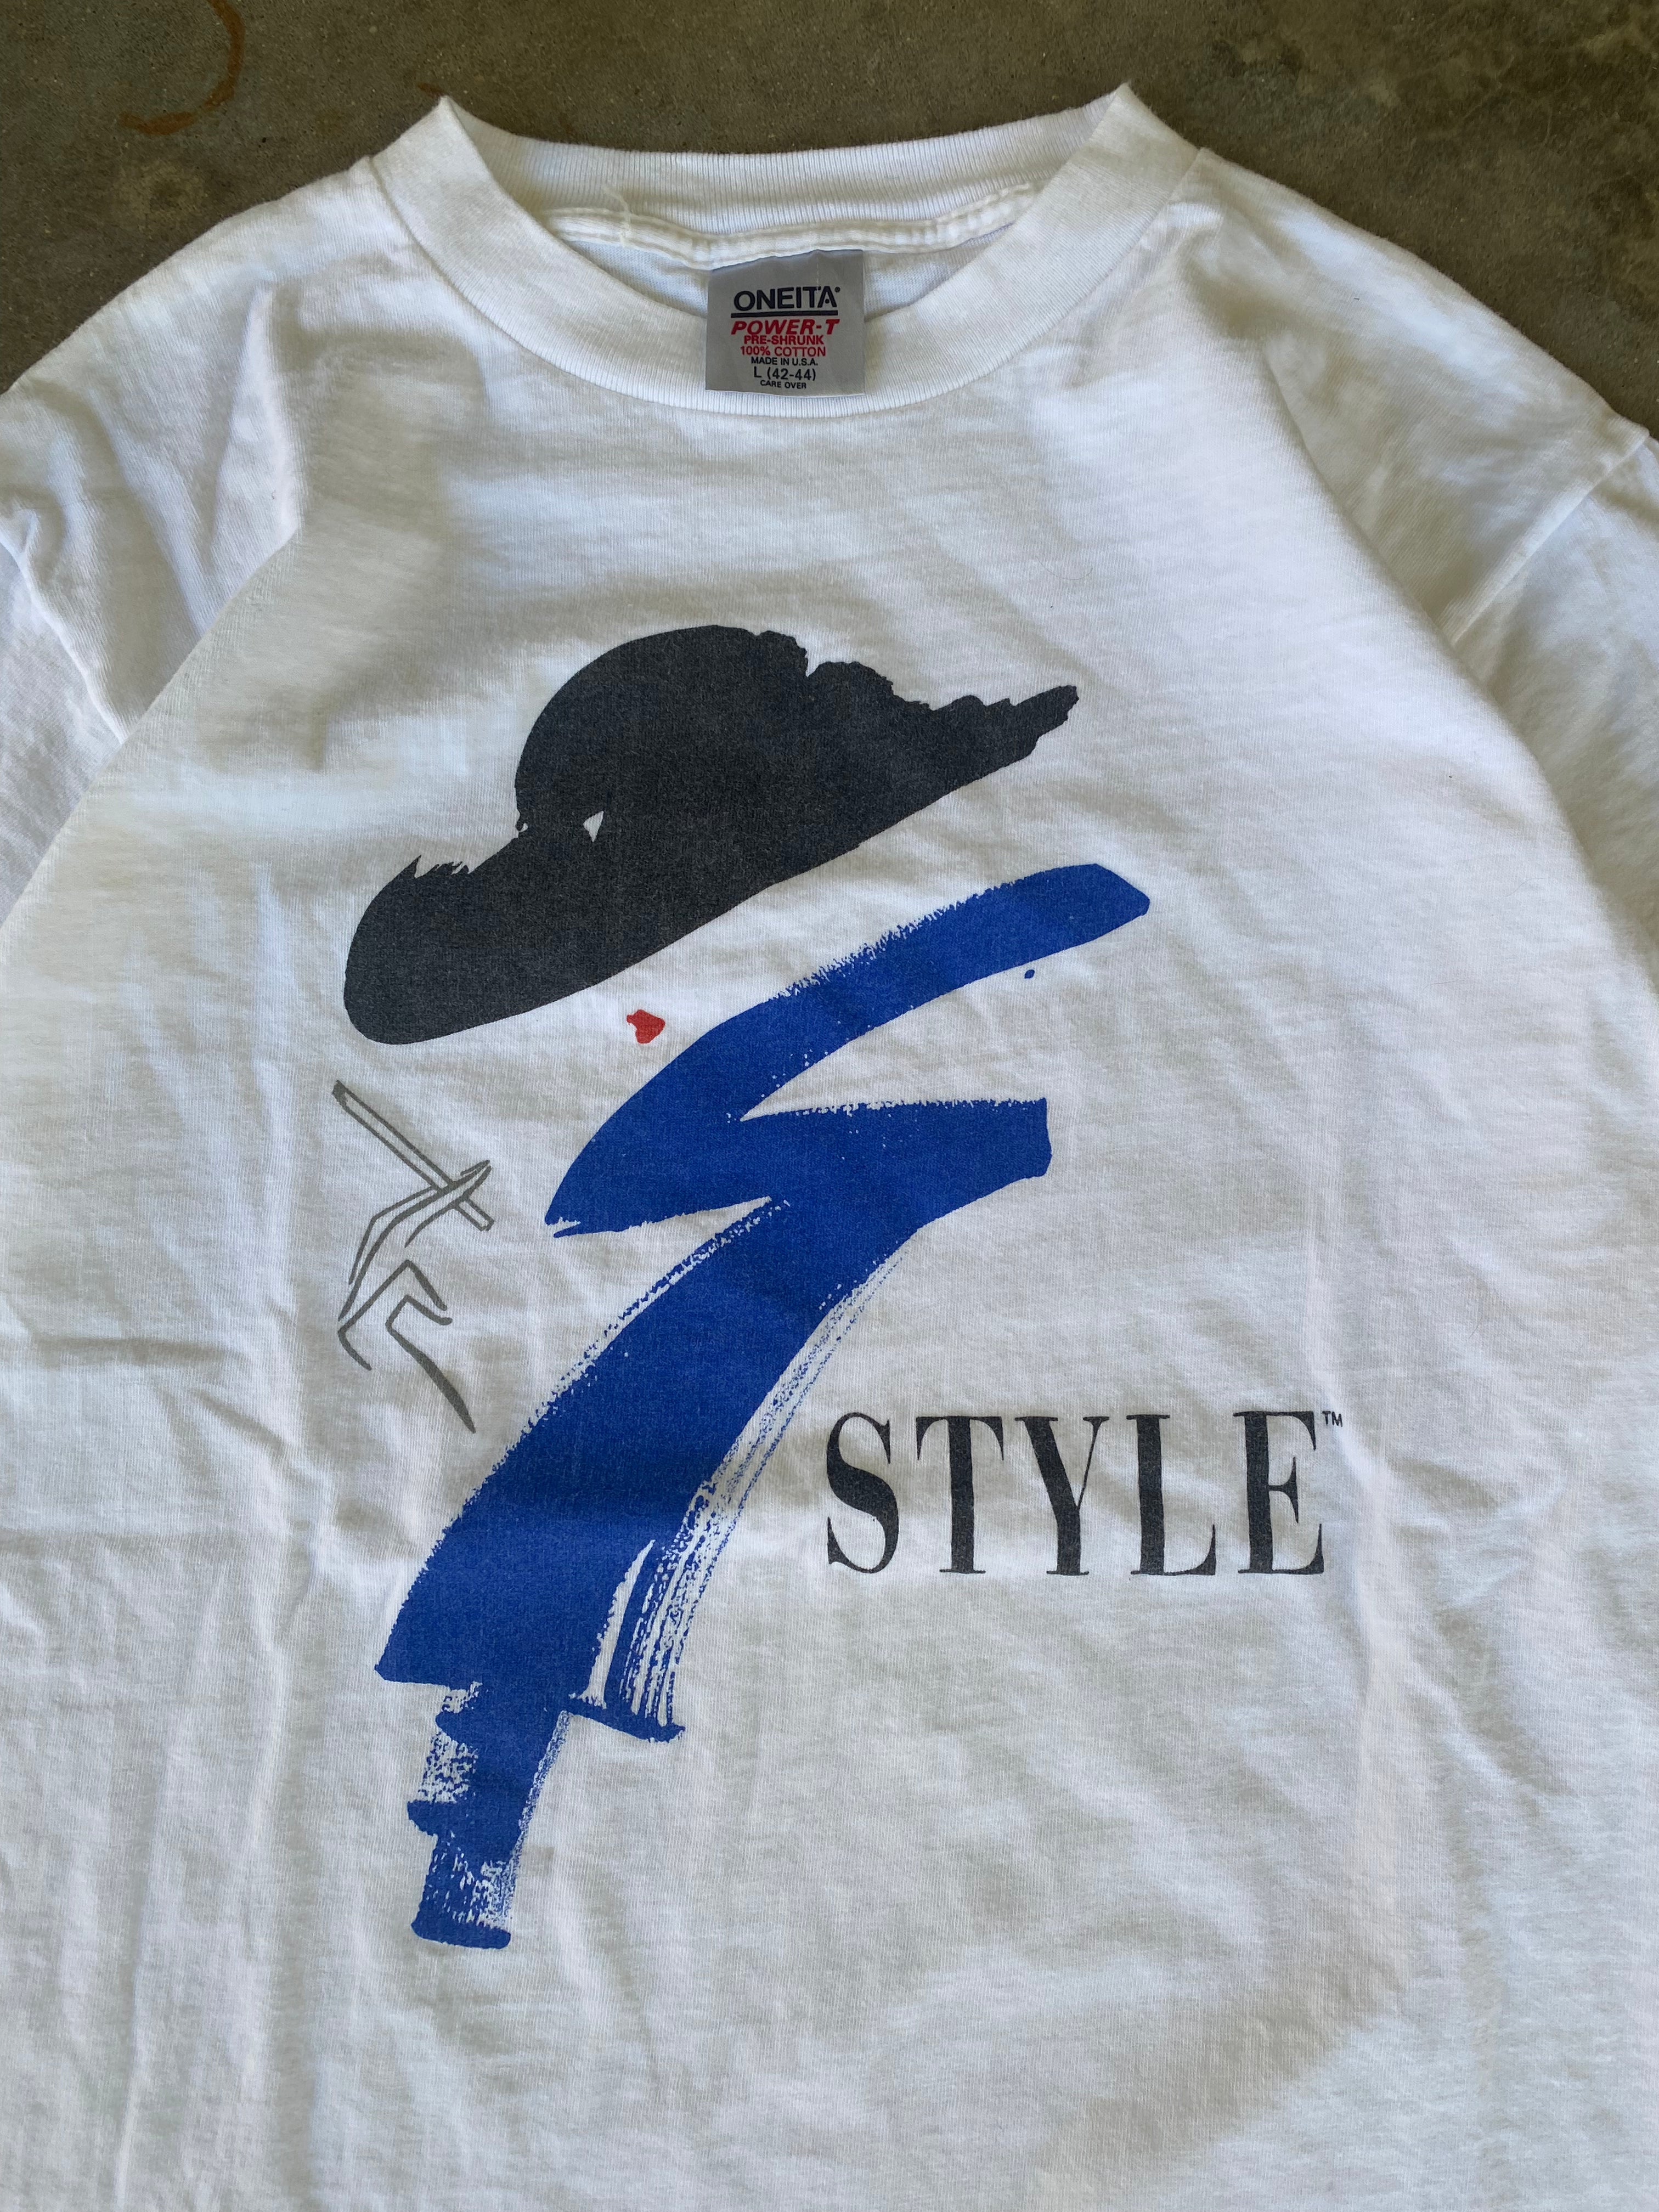 1990s Style T-Shirt (S/M)